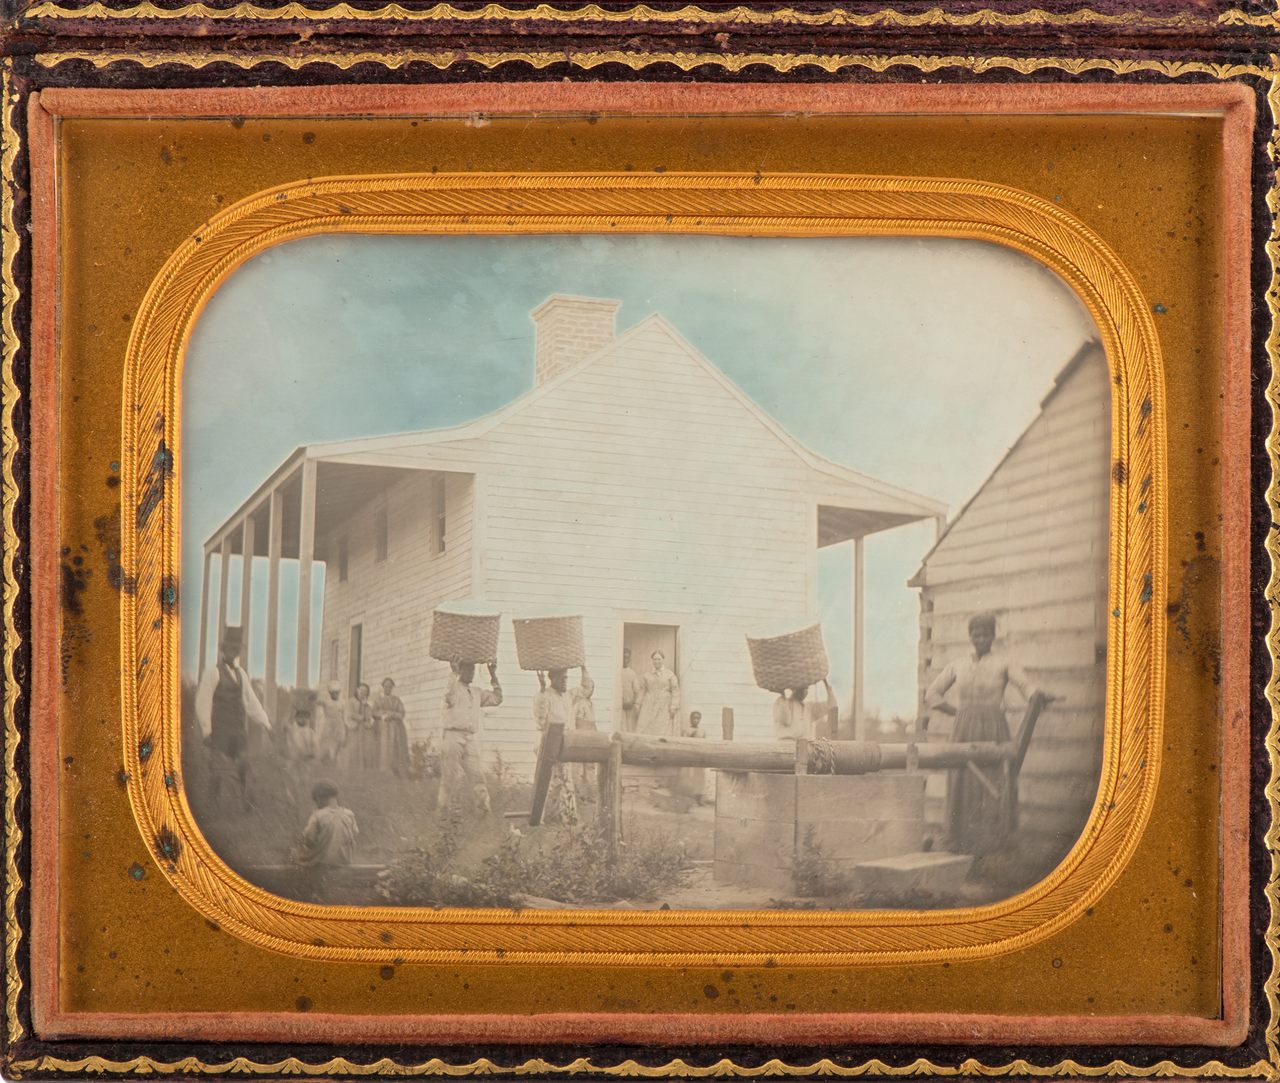 The daguerreotype within its original leather frame.